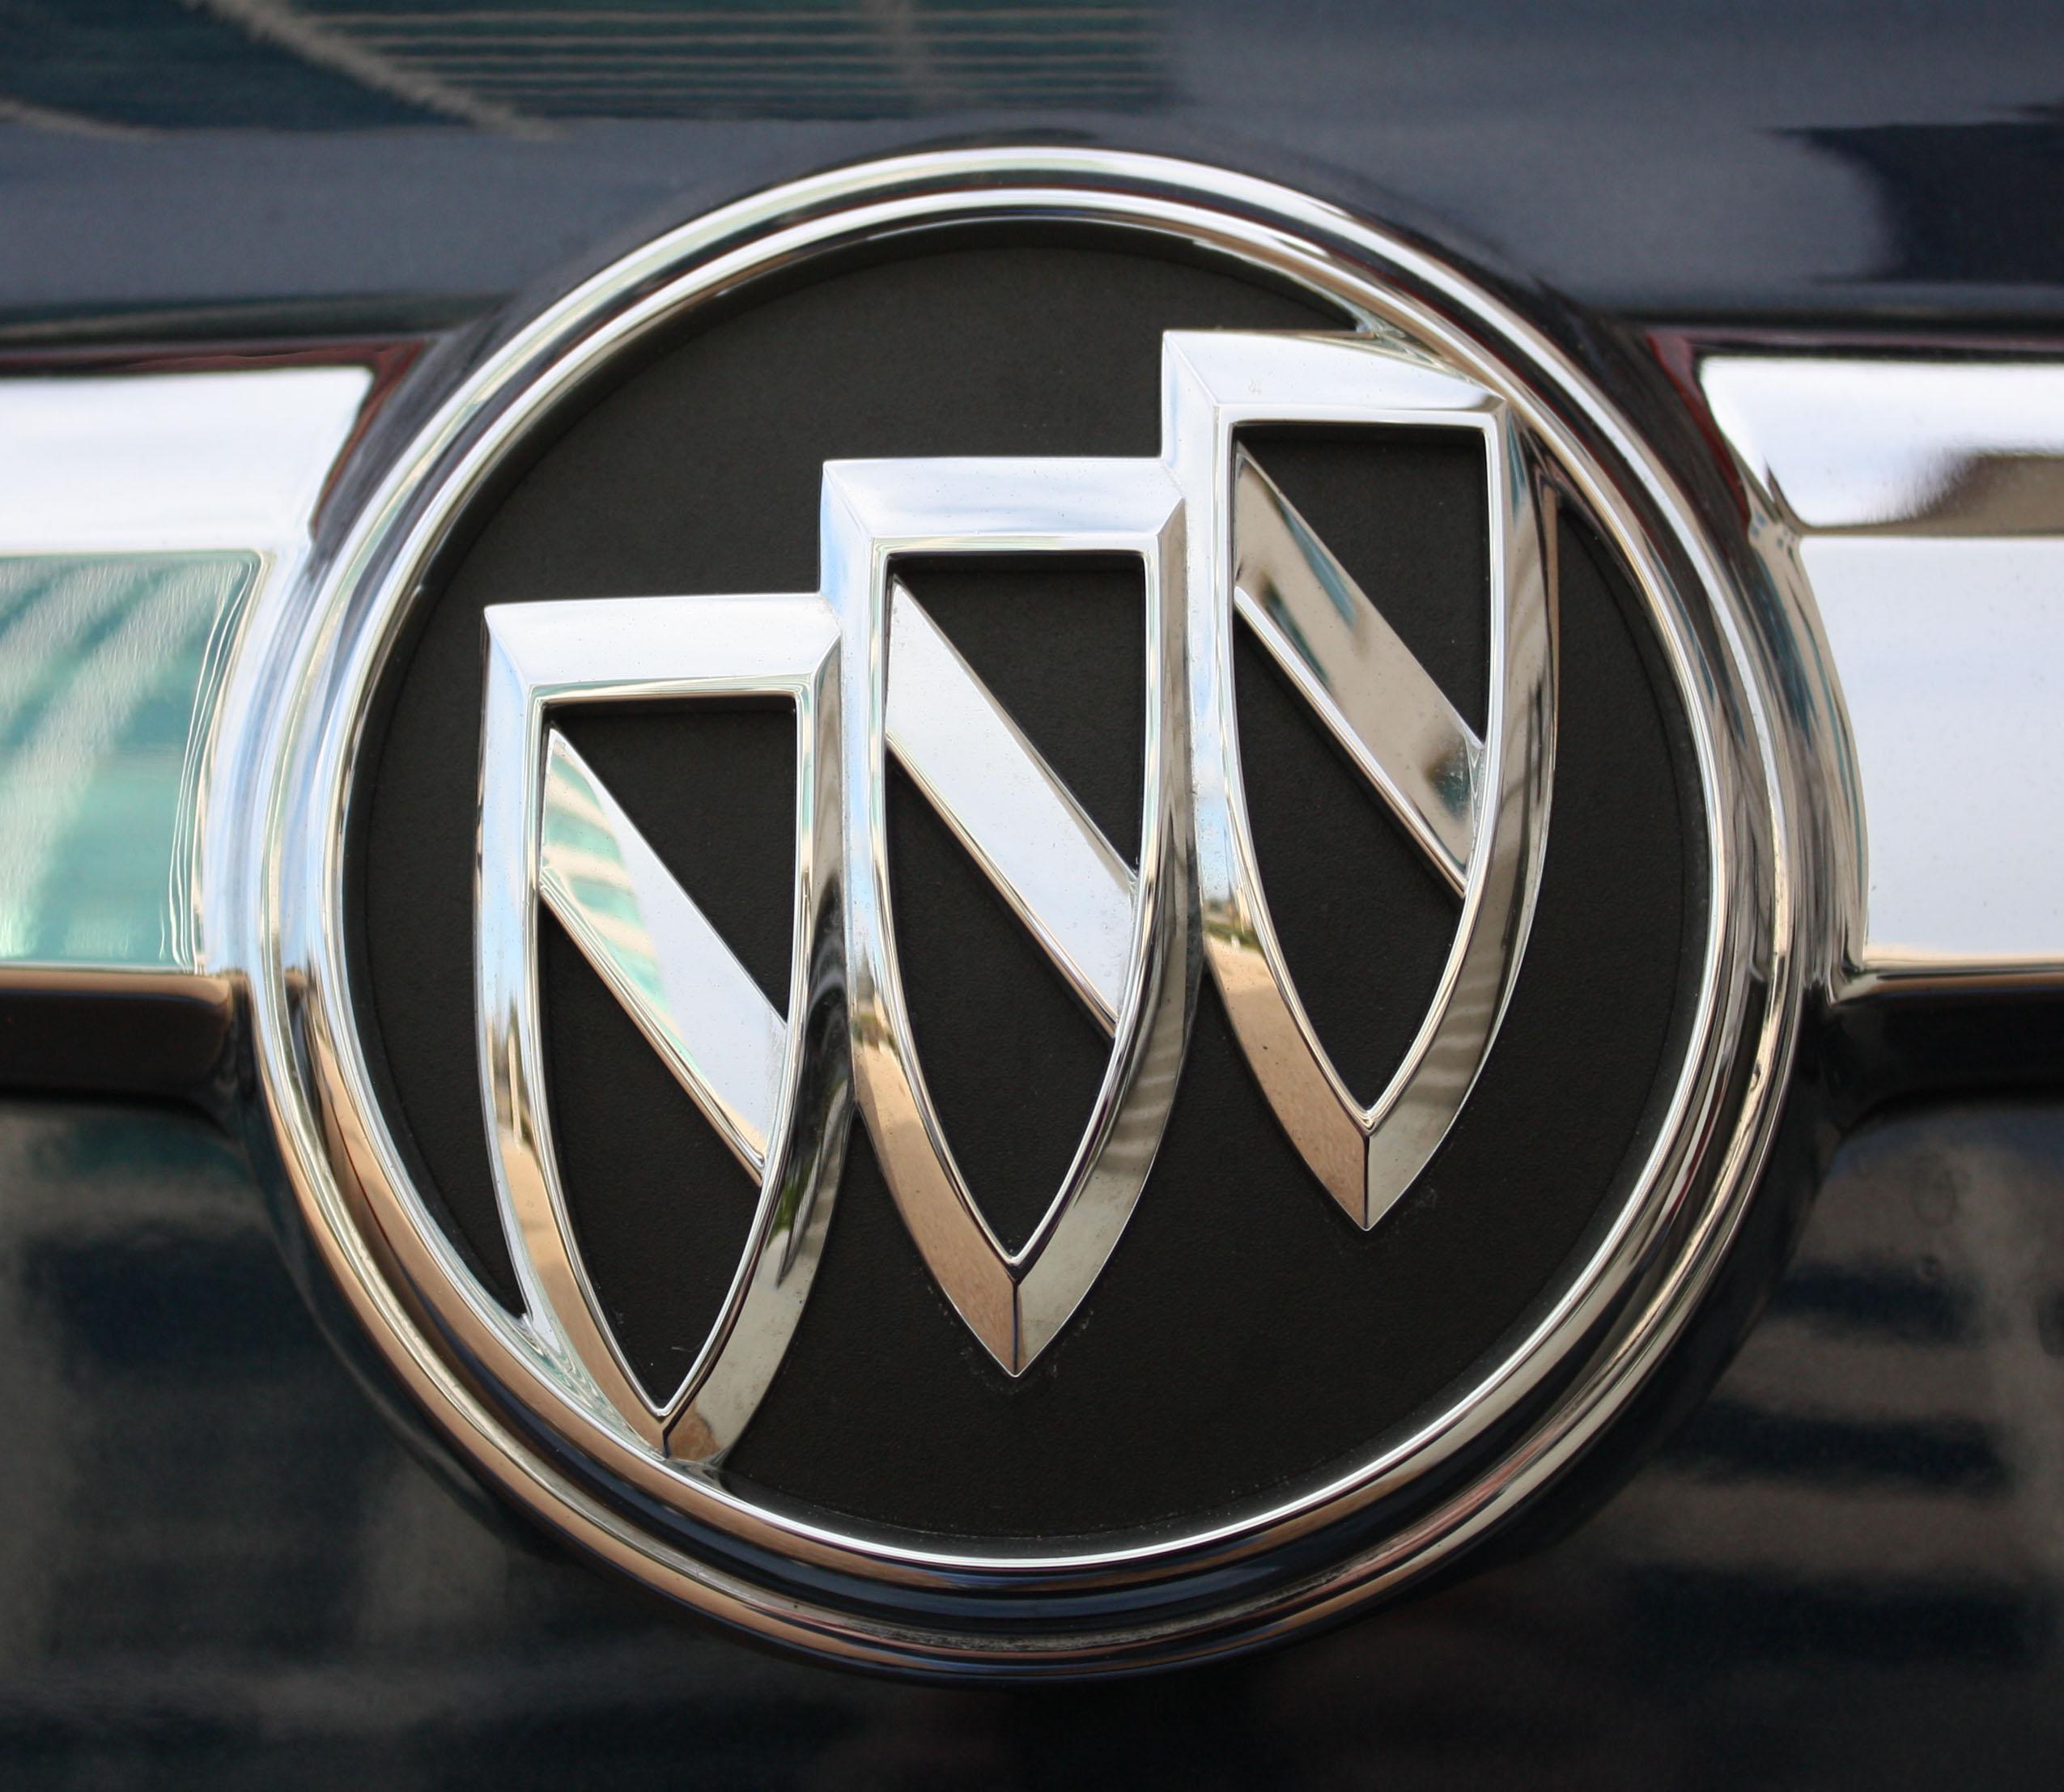 Buick logo free wallpapers